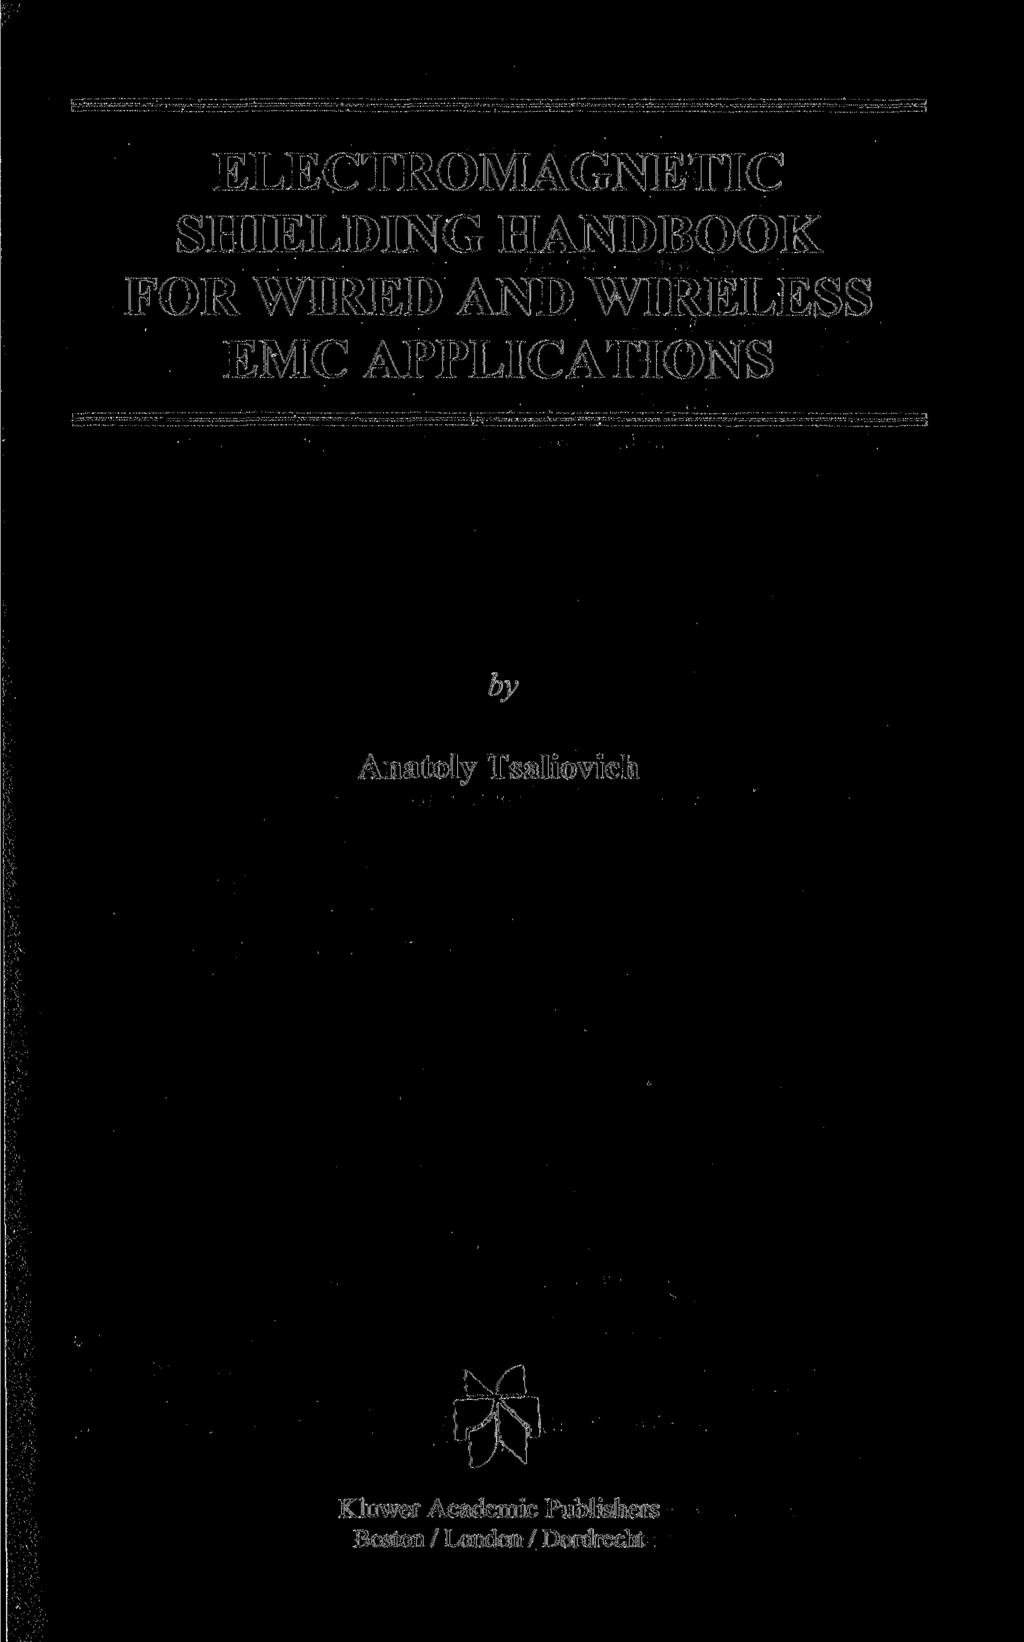 ELECTROMAGNETIC SHIELDING HANDBOOK FOR WIRED AND WIRELESS EMC APPLICATIONS